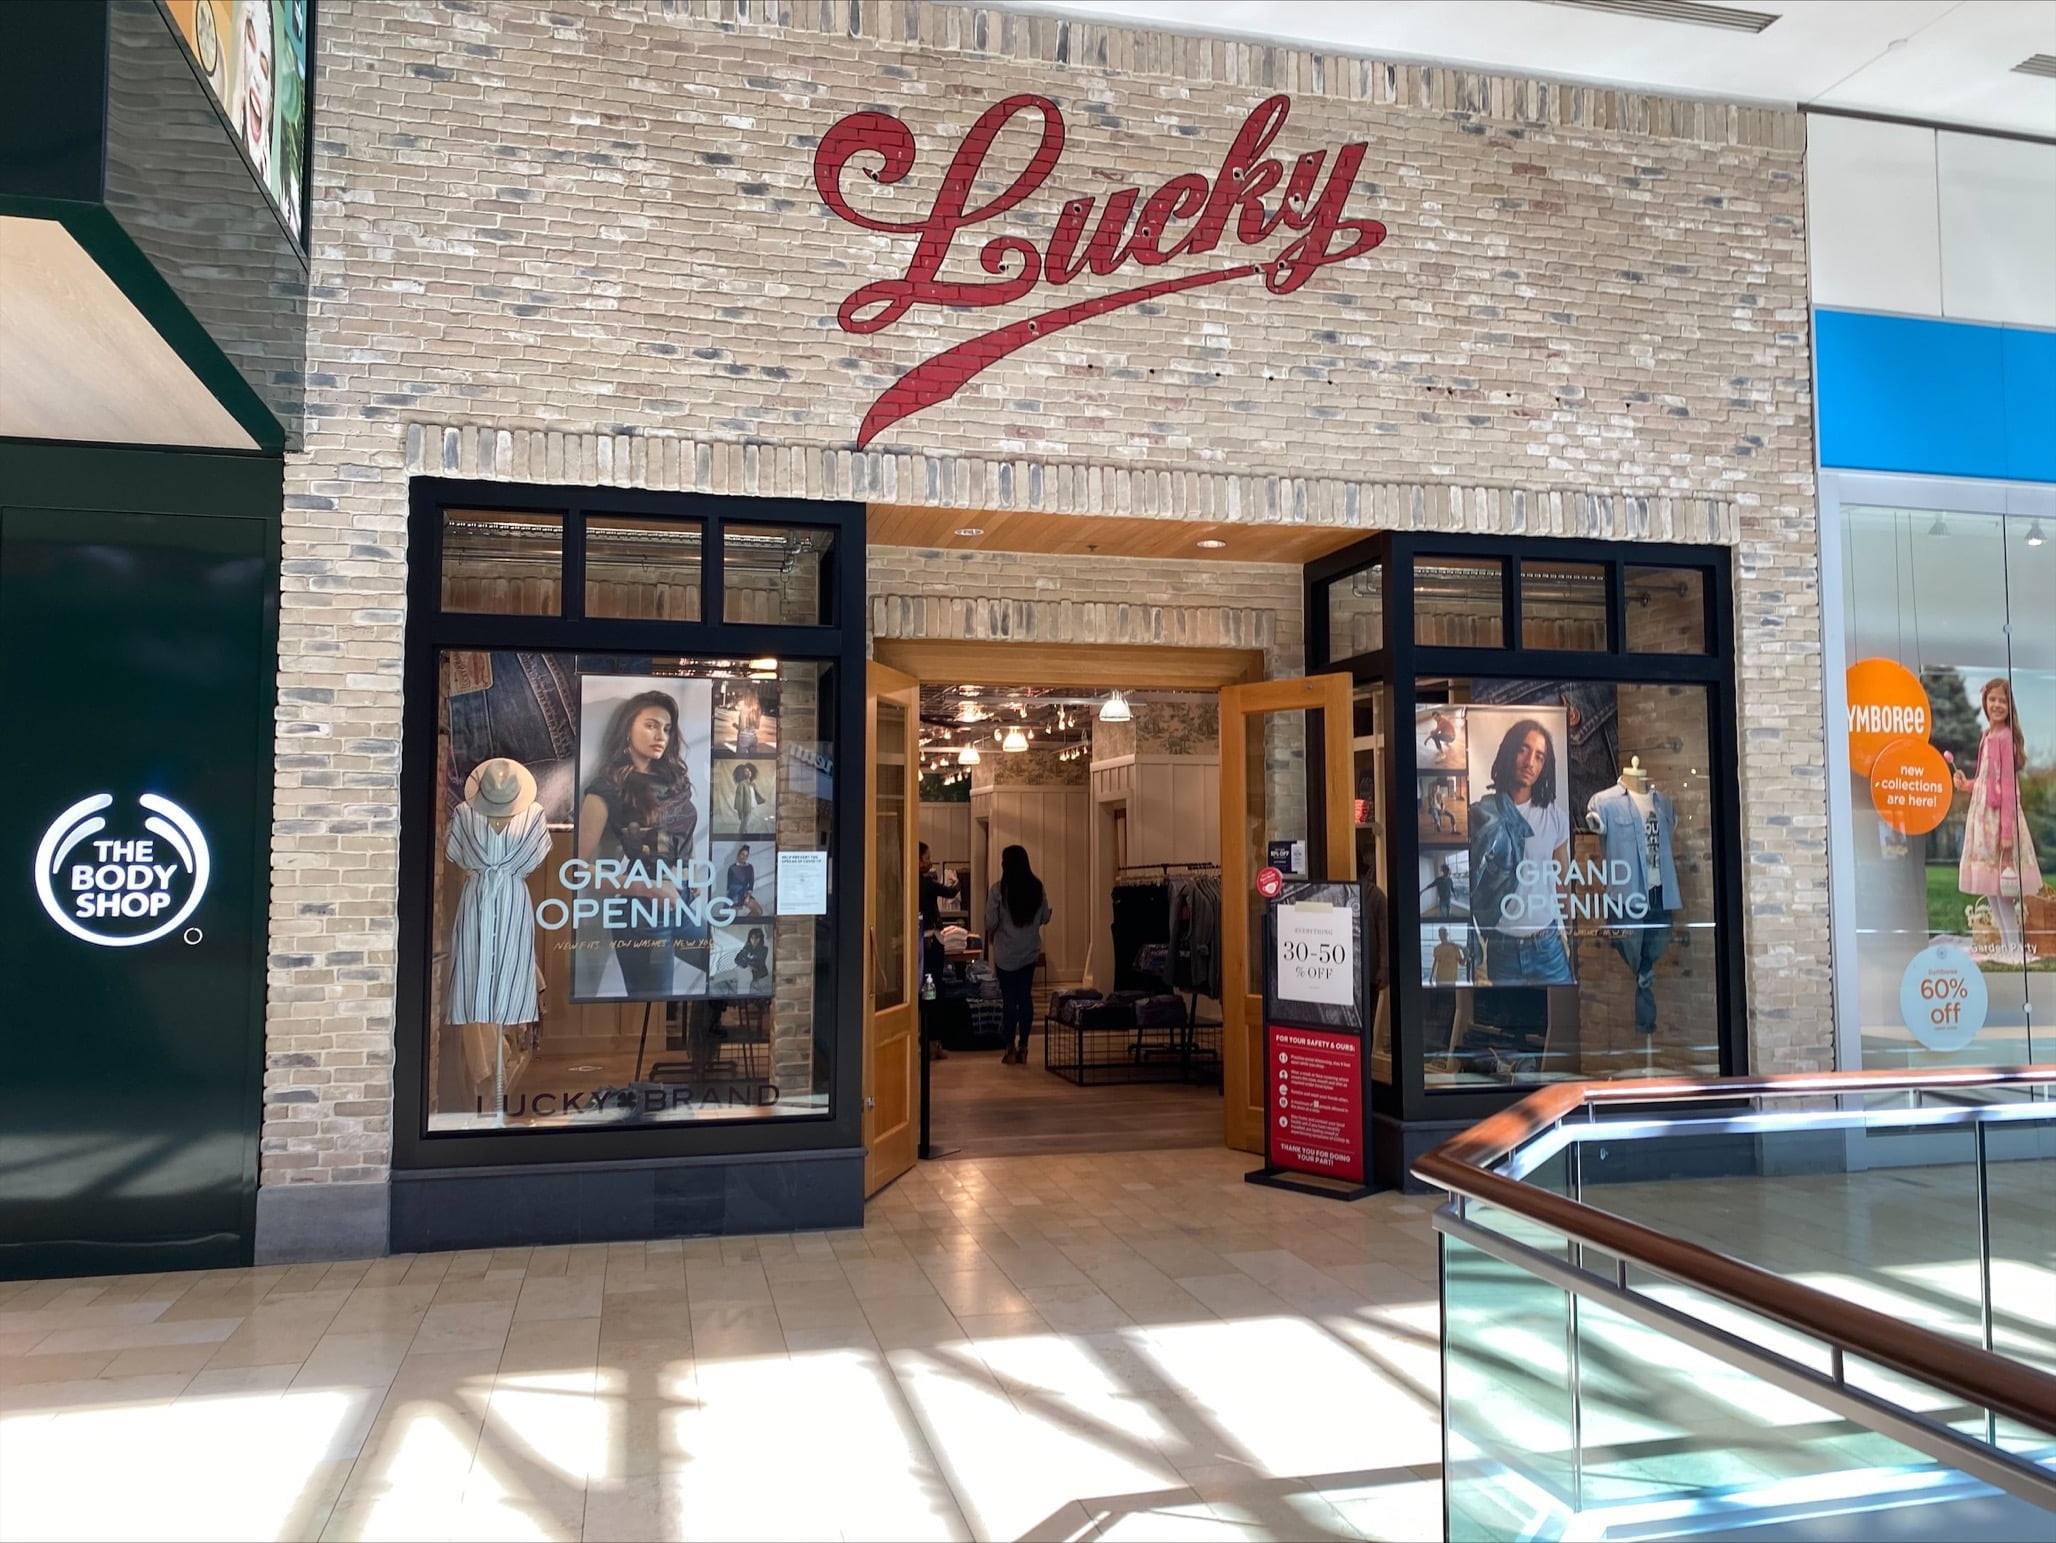 Lucky Brand Jeans - Shopping Mall, Stock Video